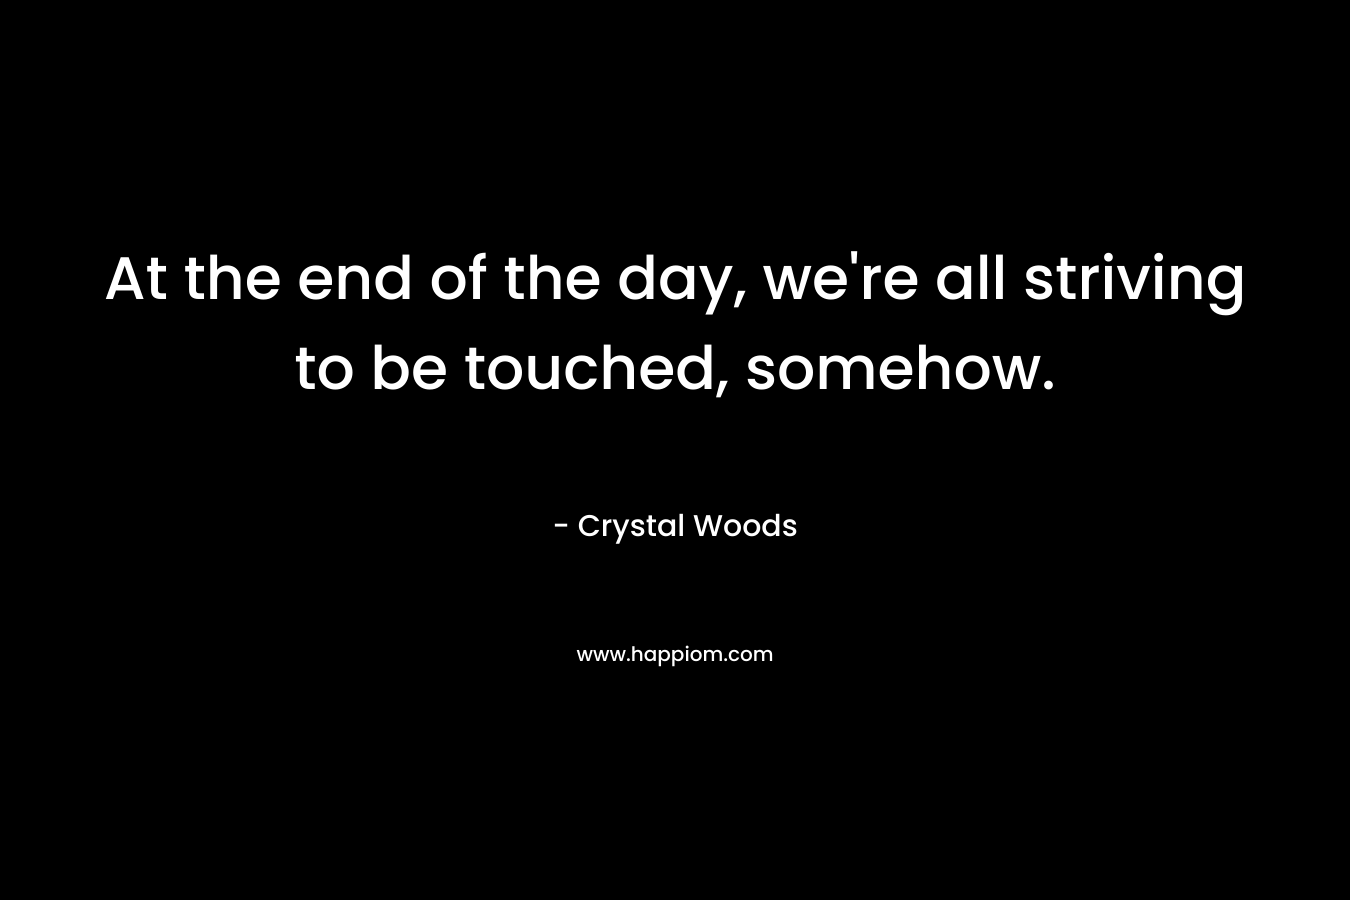 At the end of the day, we’re all striving to be touched, somehow. – Crystal Woods